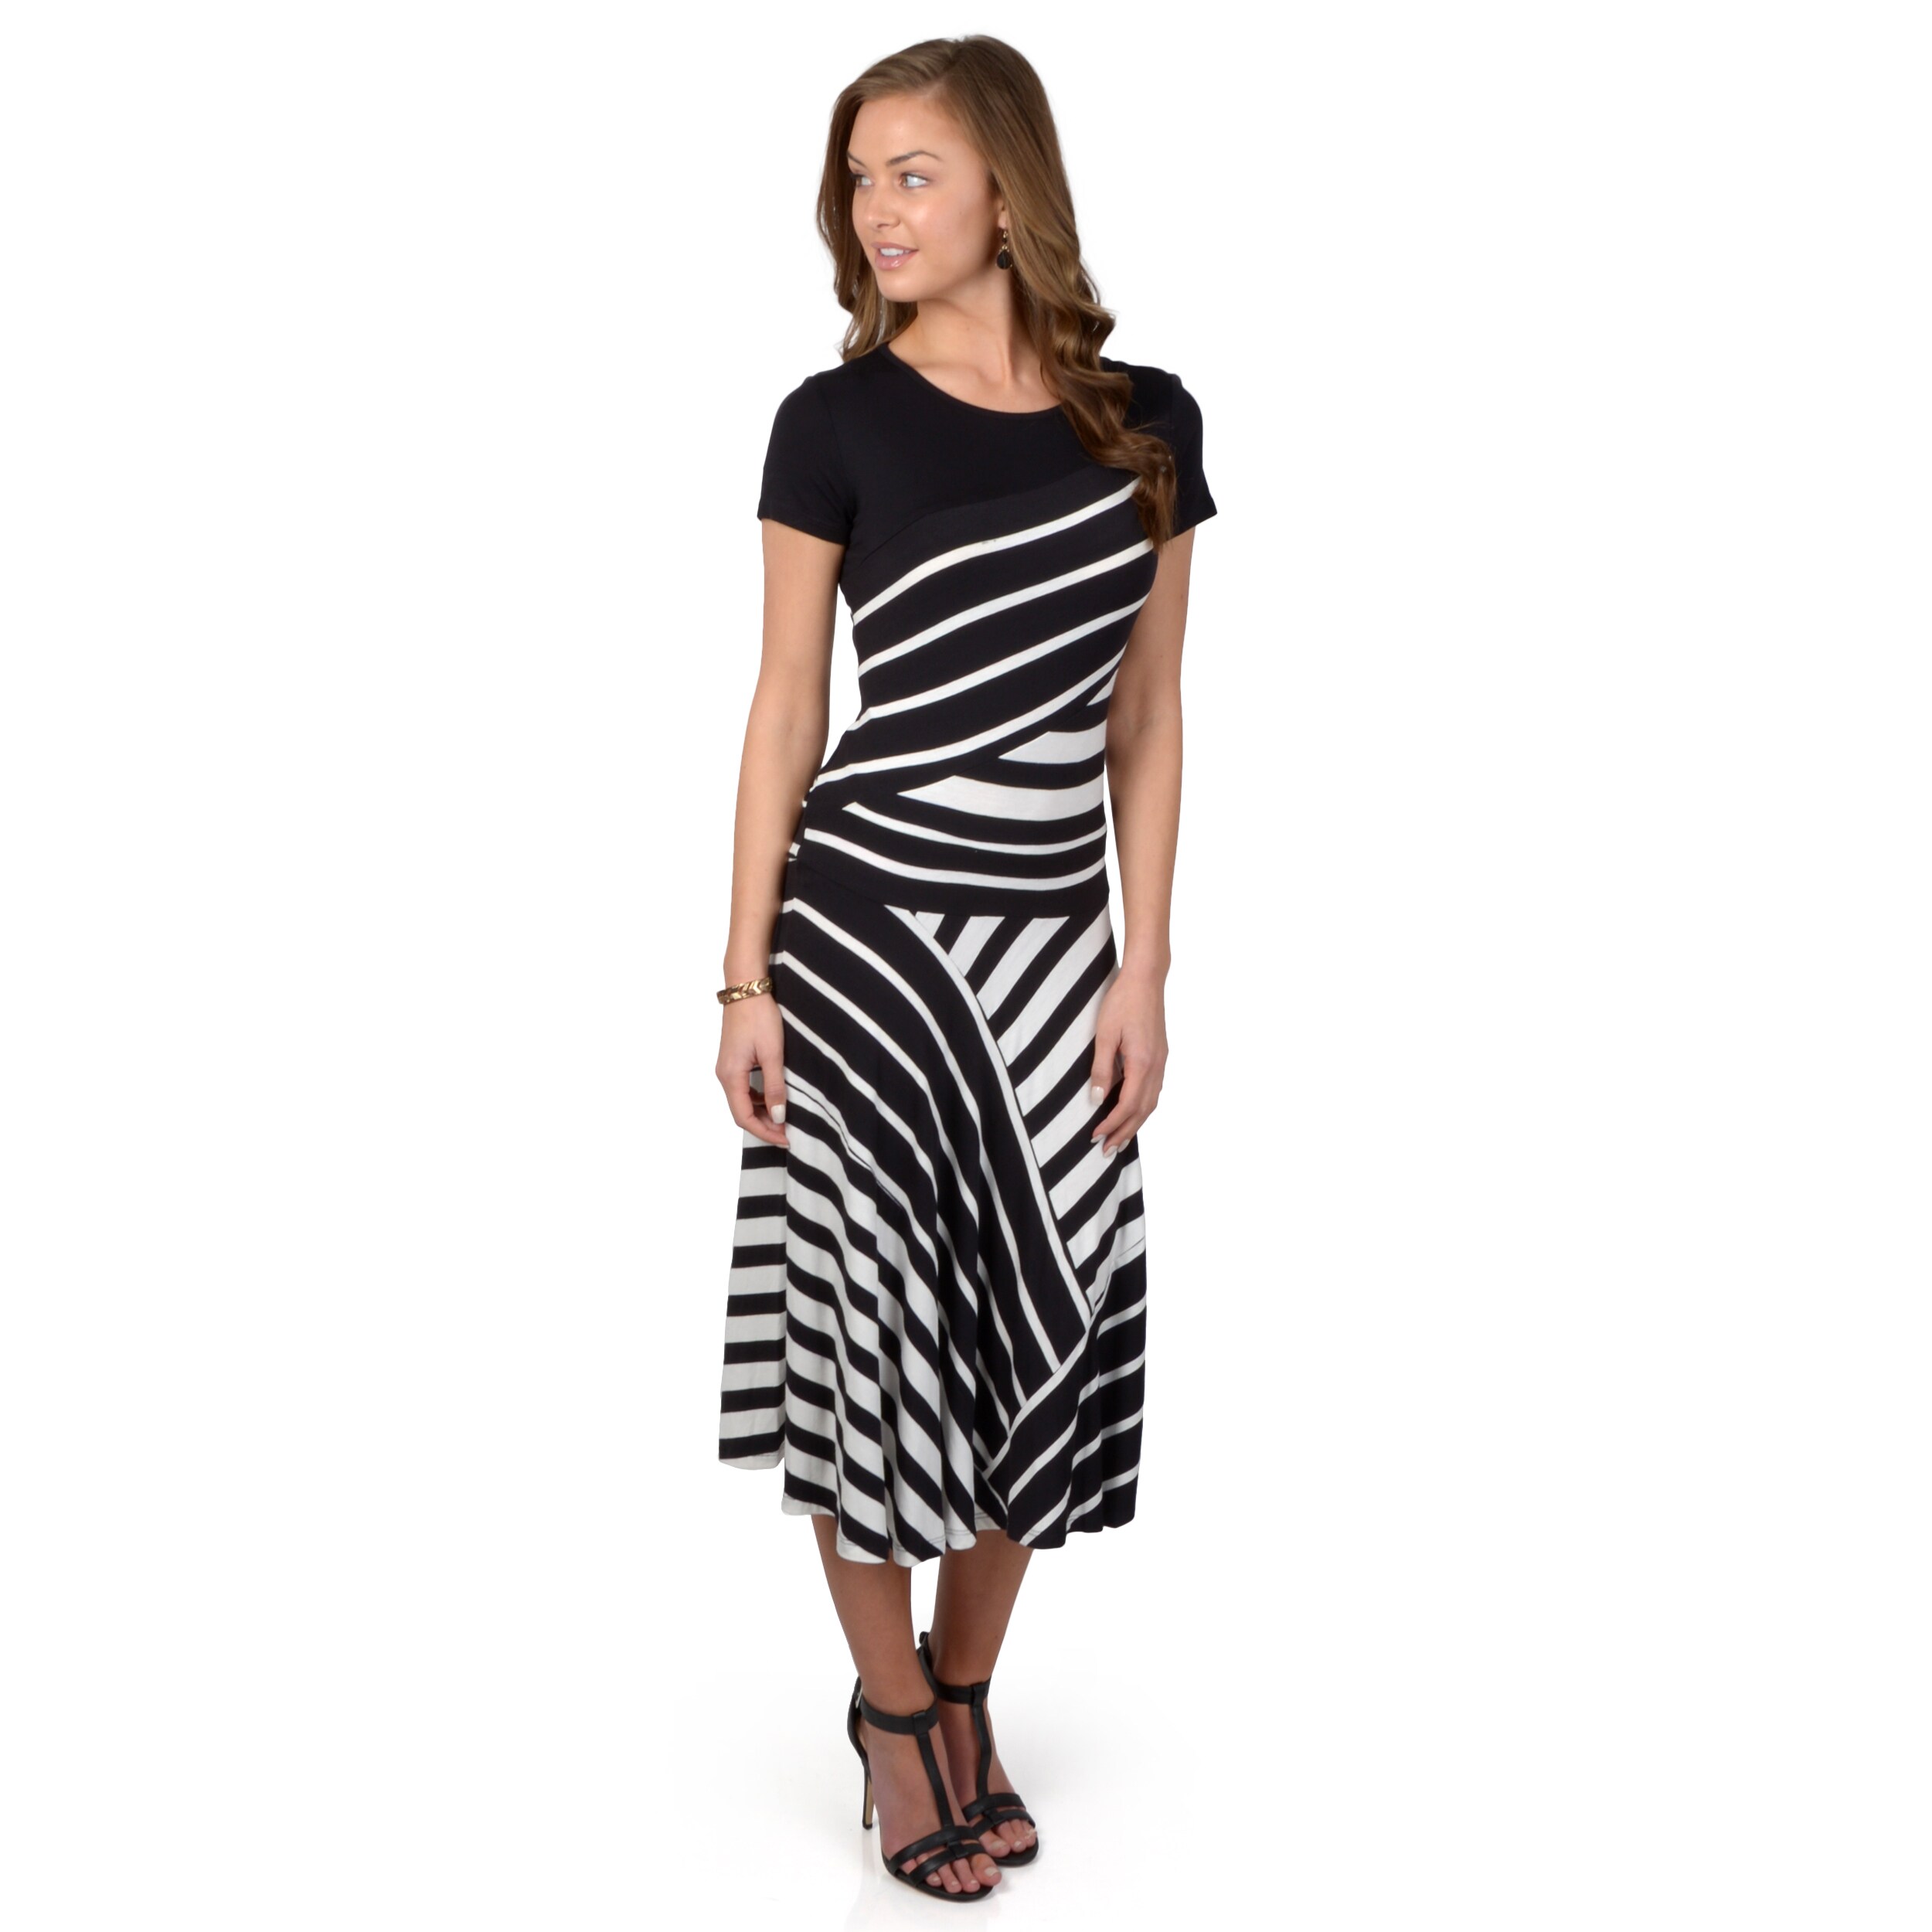 Journee Collection Womens Short sleeve Striped Knit Dress